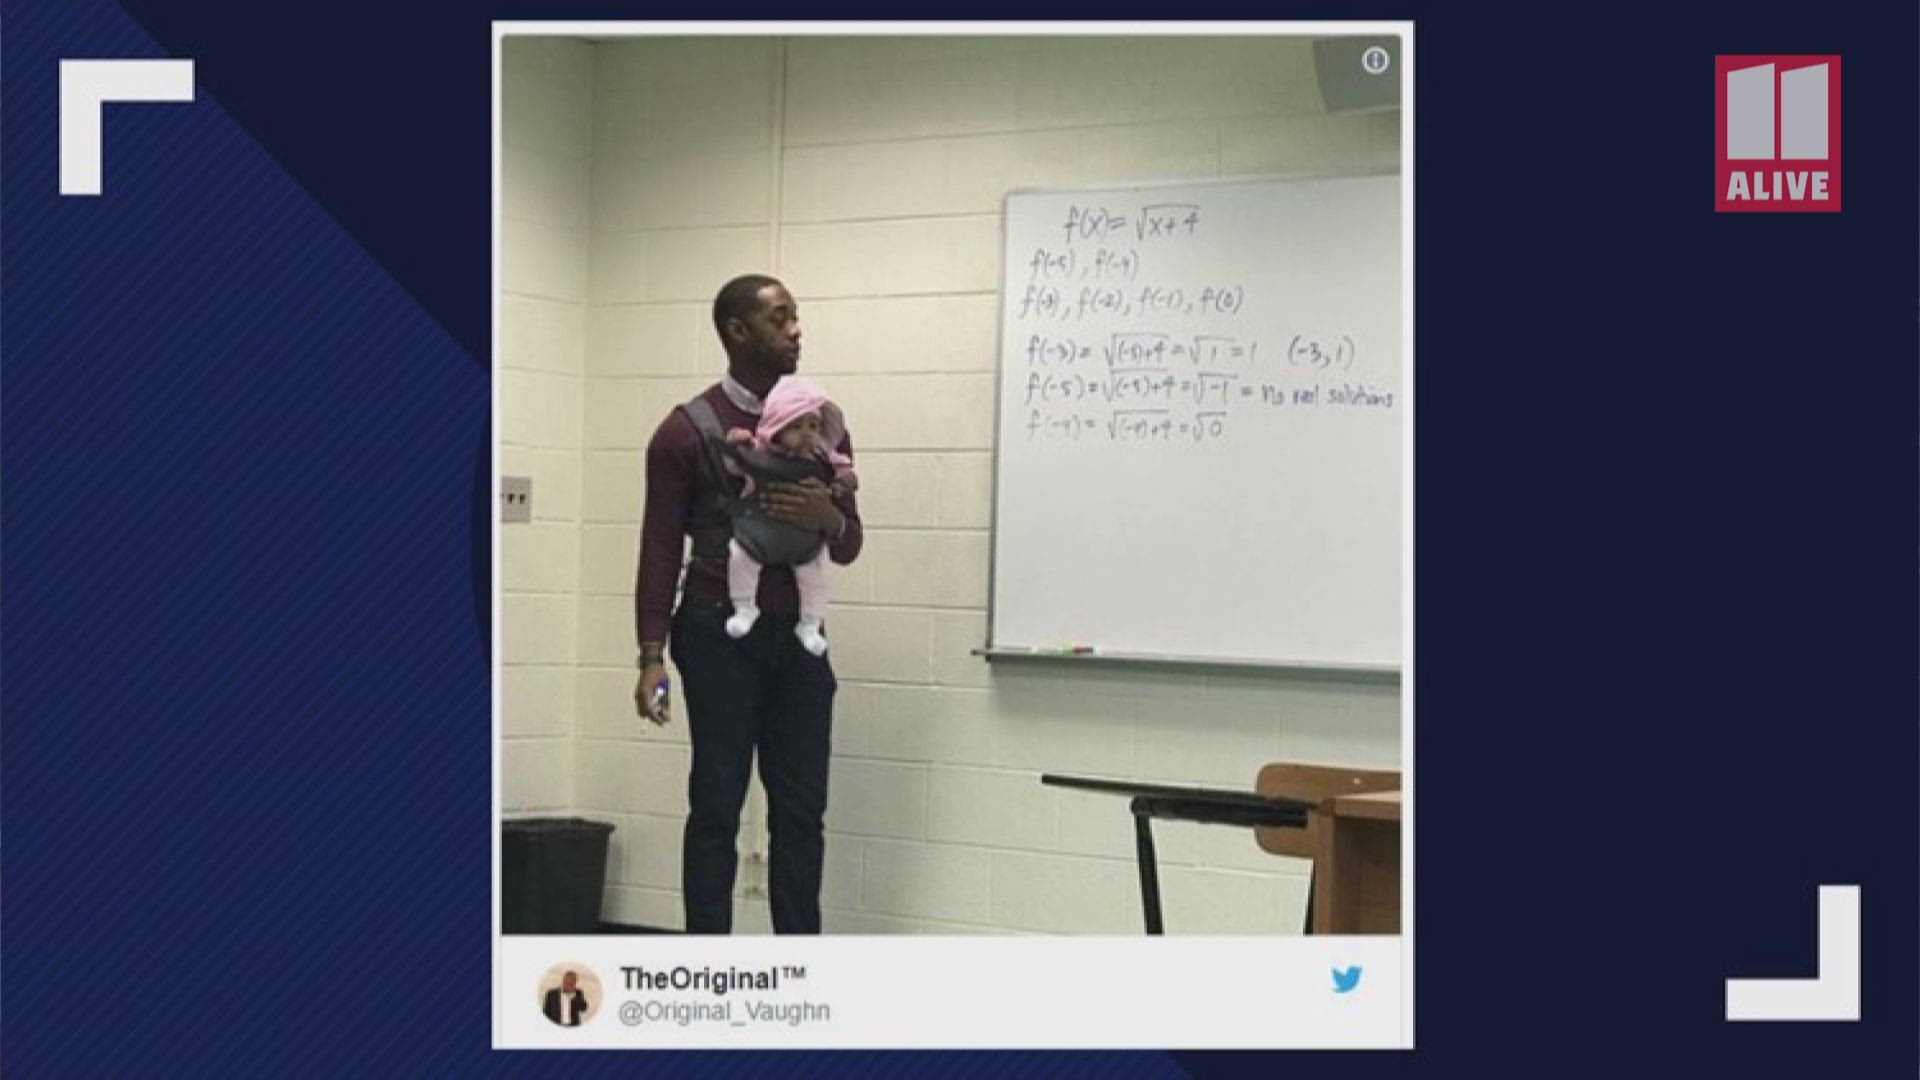 Morehouse College professor tells a young dad that he can bring in his 5-month old daughter if he needs to. Not only did he allow it, but he went a step further and held the infant so her dad could take notes during class.